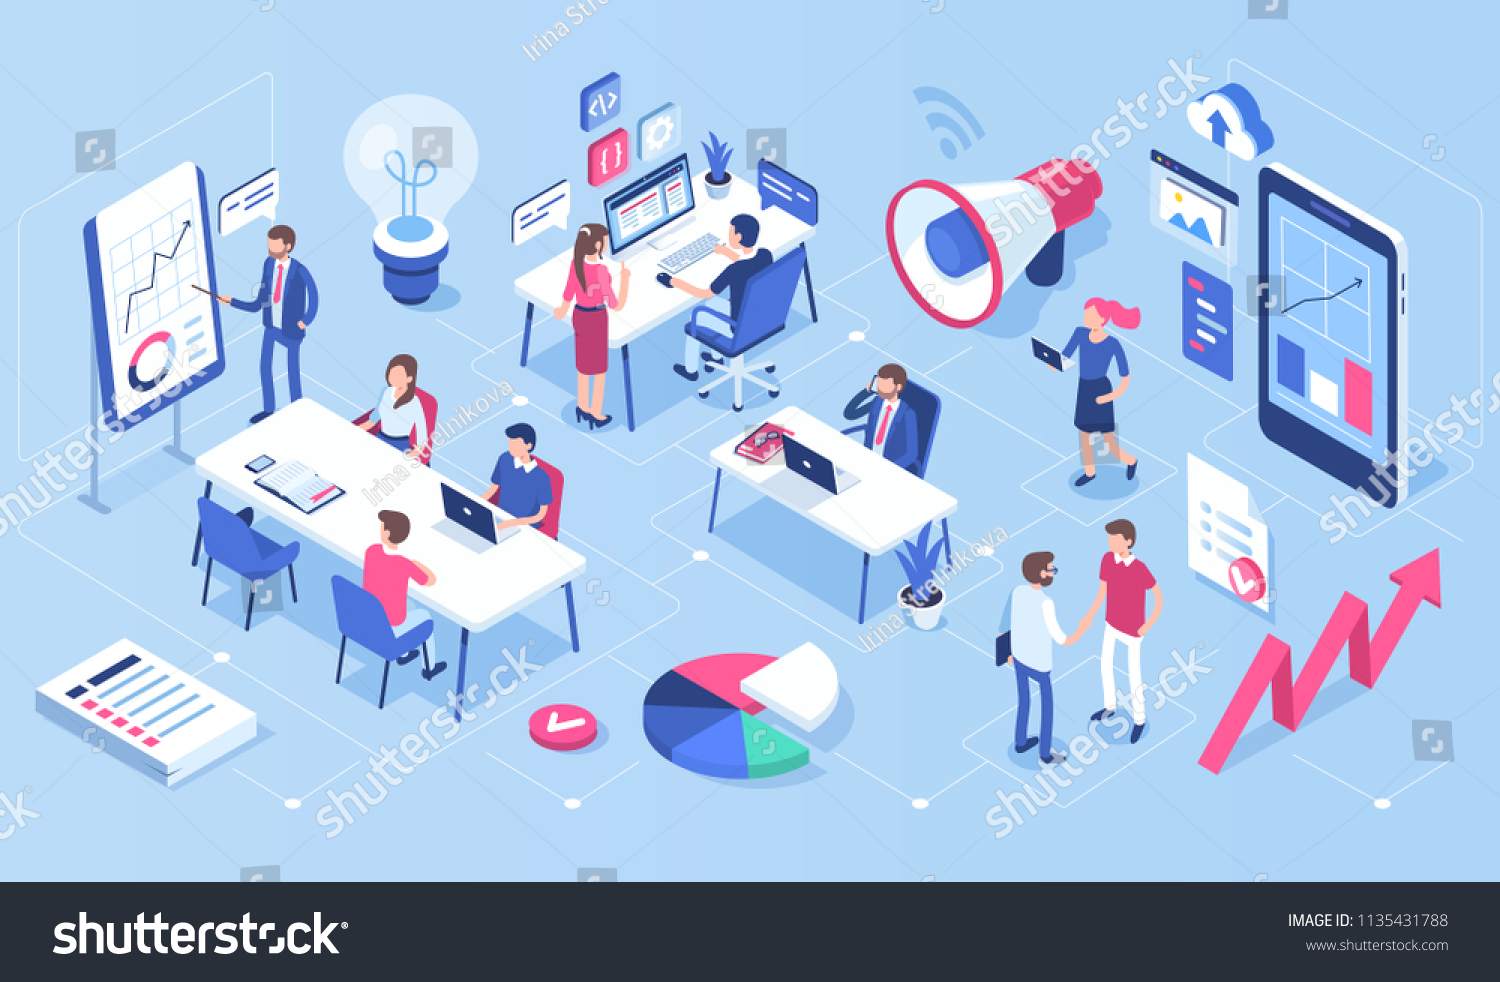 People in open space office concept design. Can use for web banner, infographics, hero images. Flat isometric vector illustration isolated on white background. #1135431788